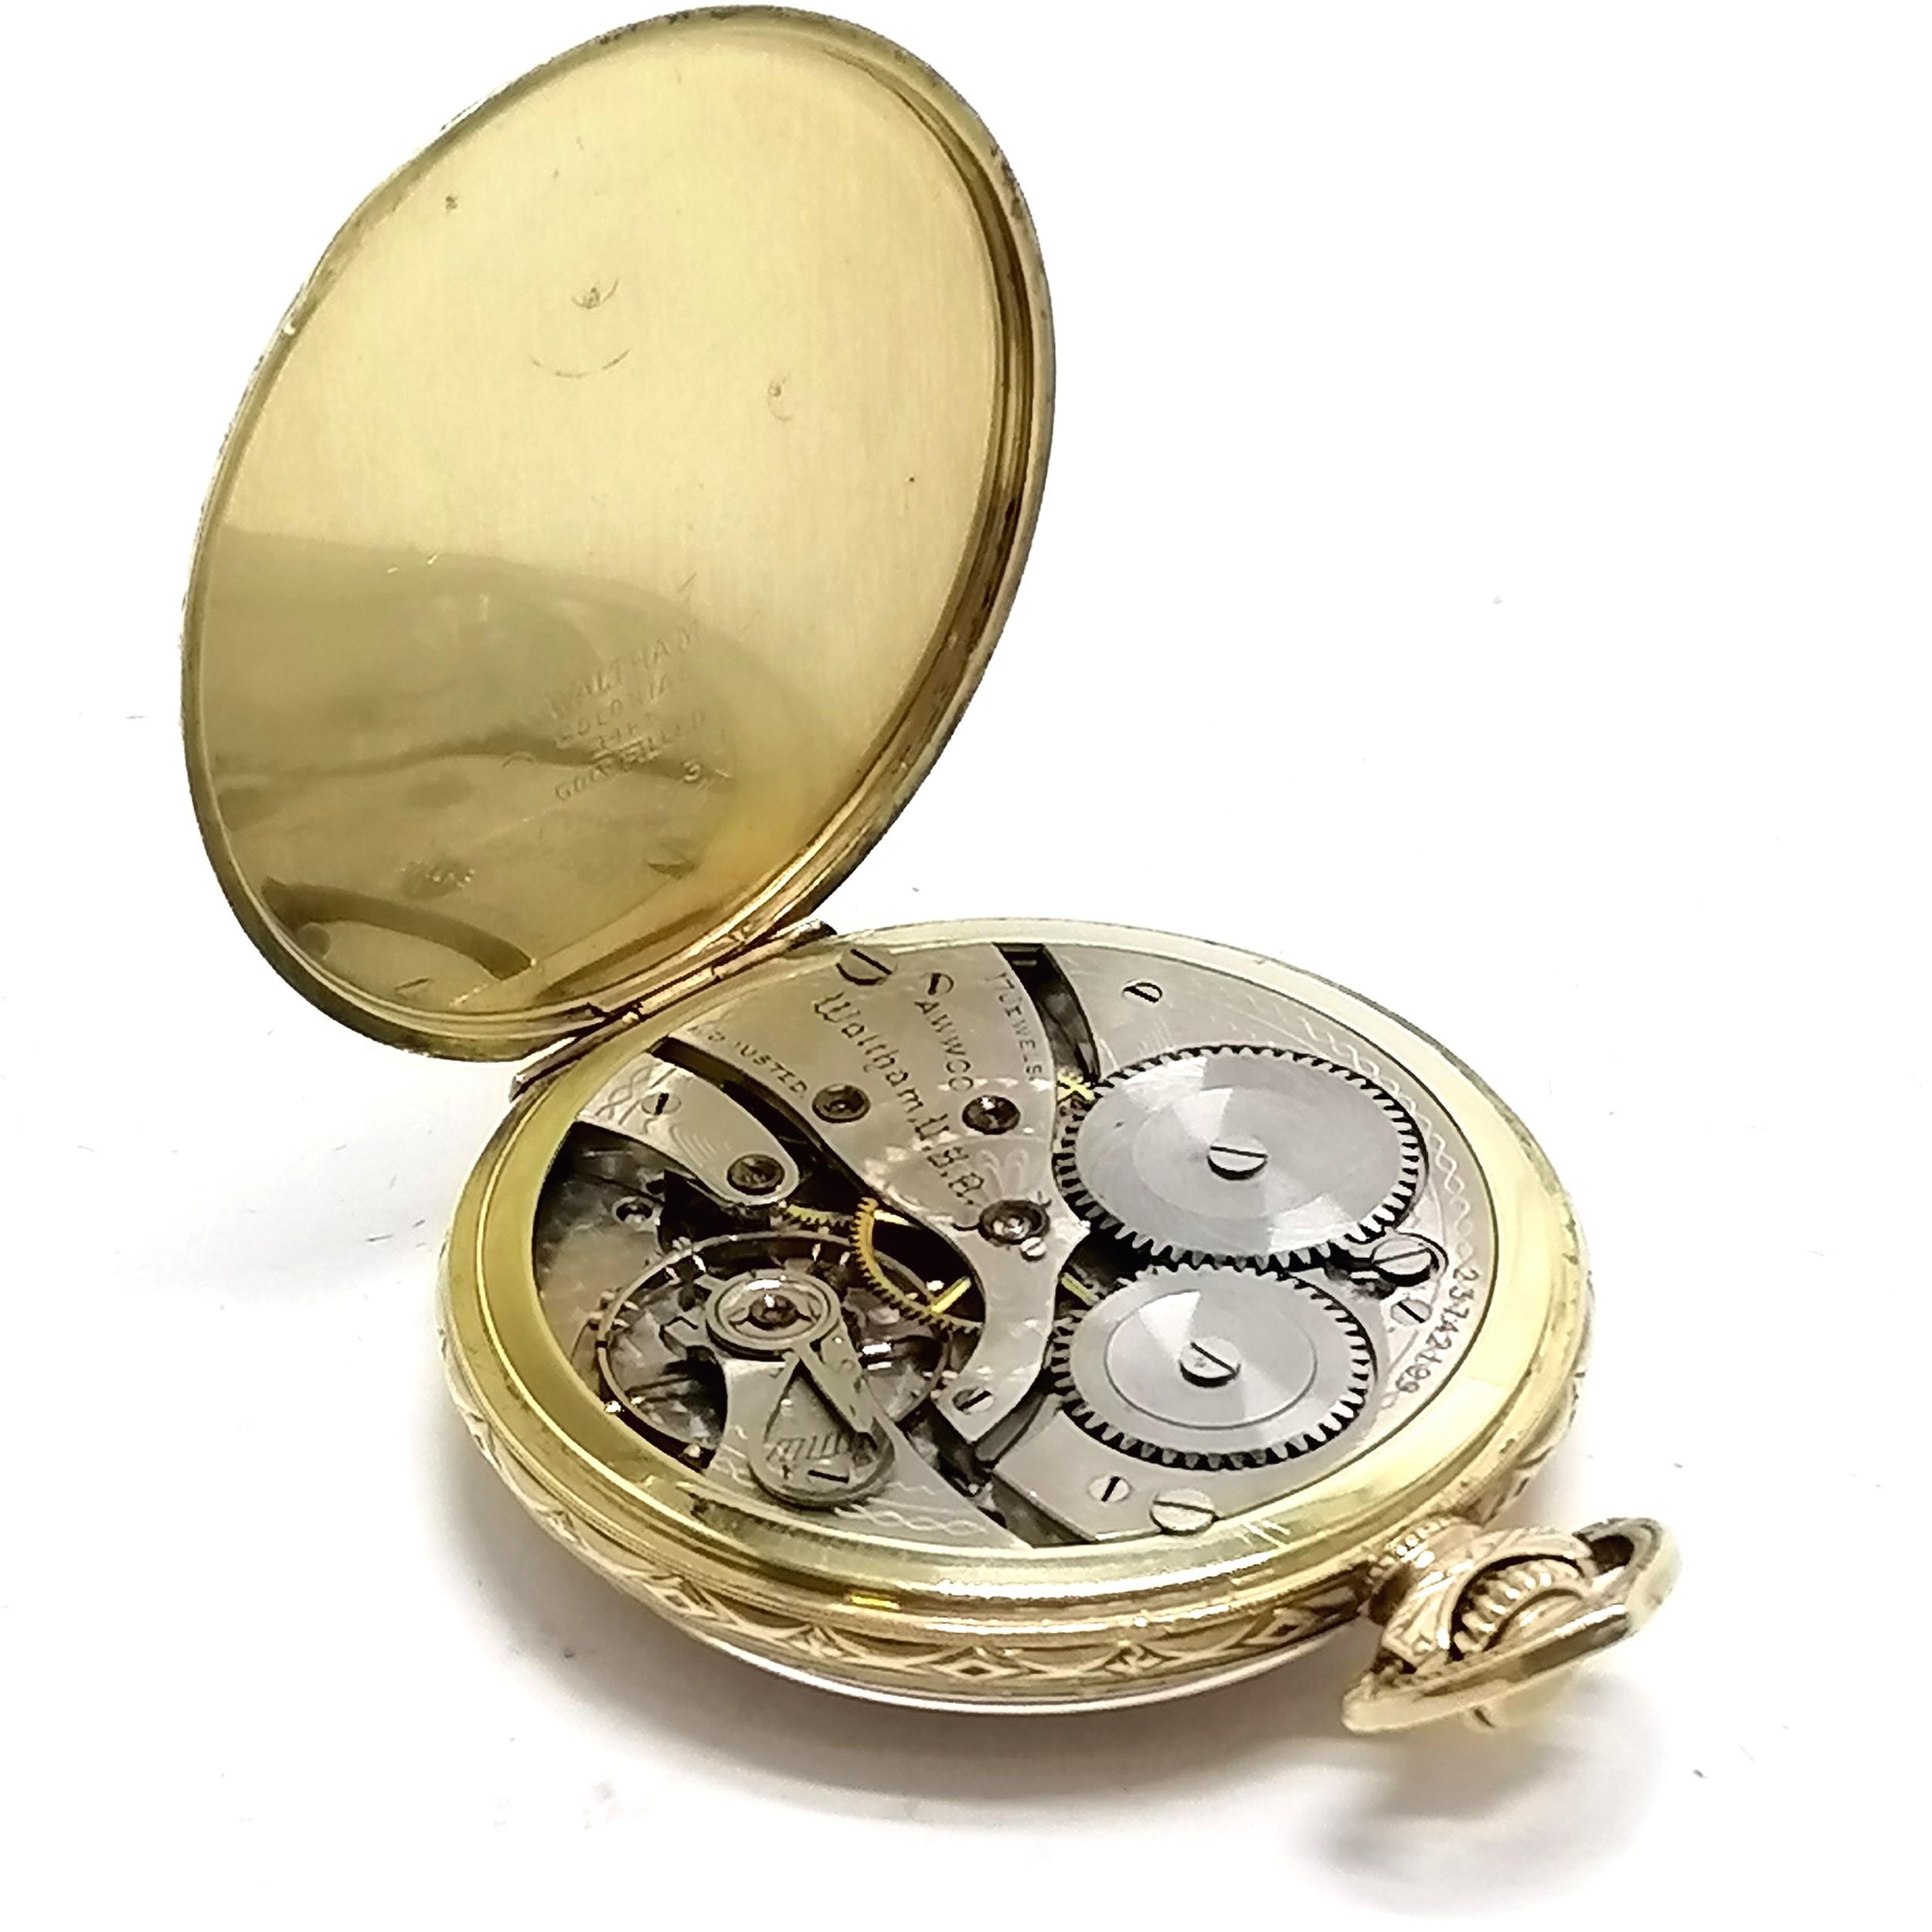 Waltham 14ct gold filled Art Deco pocket watch - 42mm case & some deterioration to dial and otherwis - Image 2 of 3